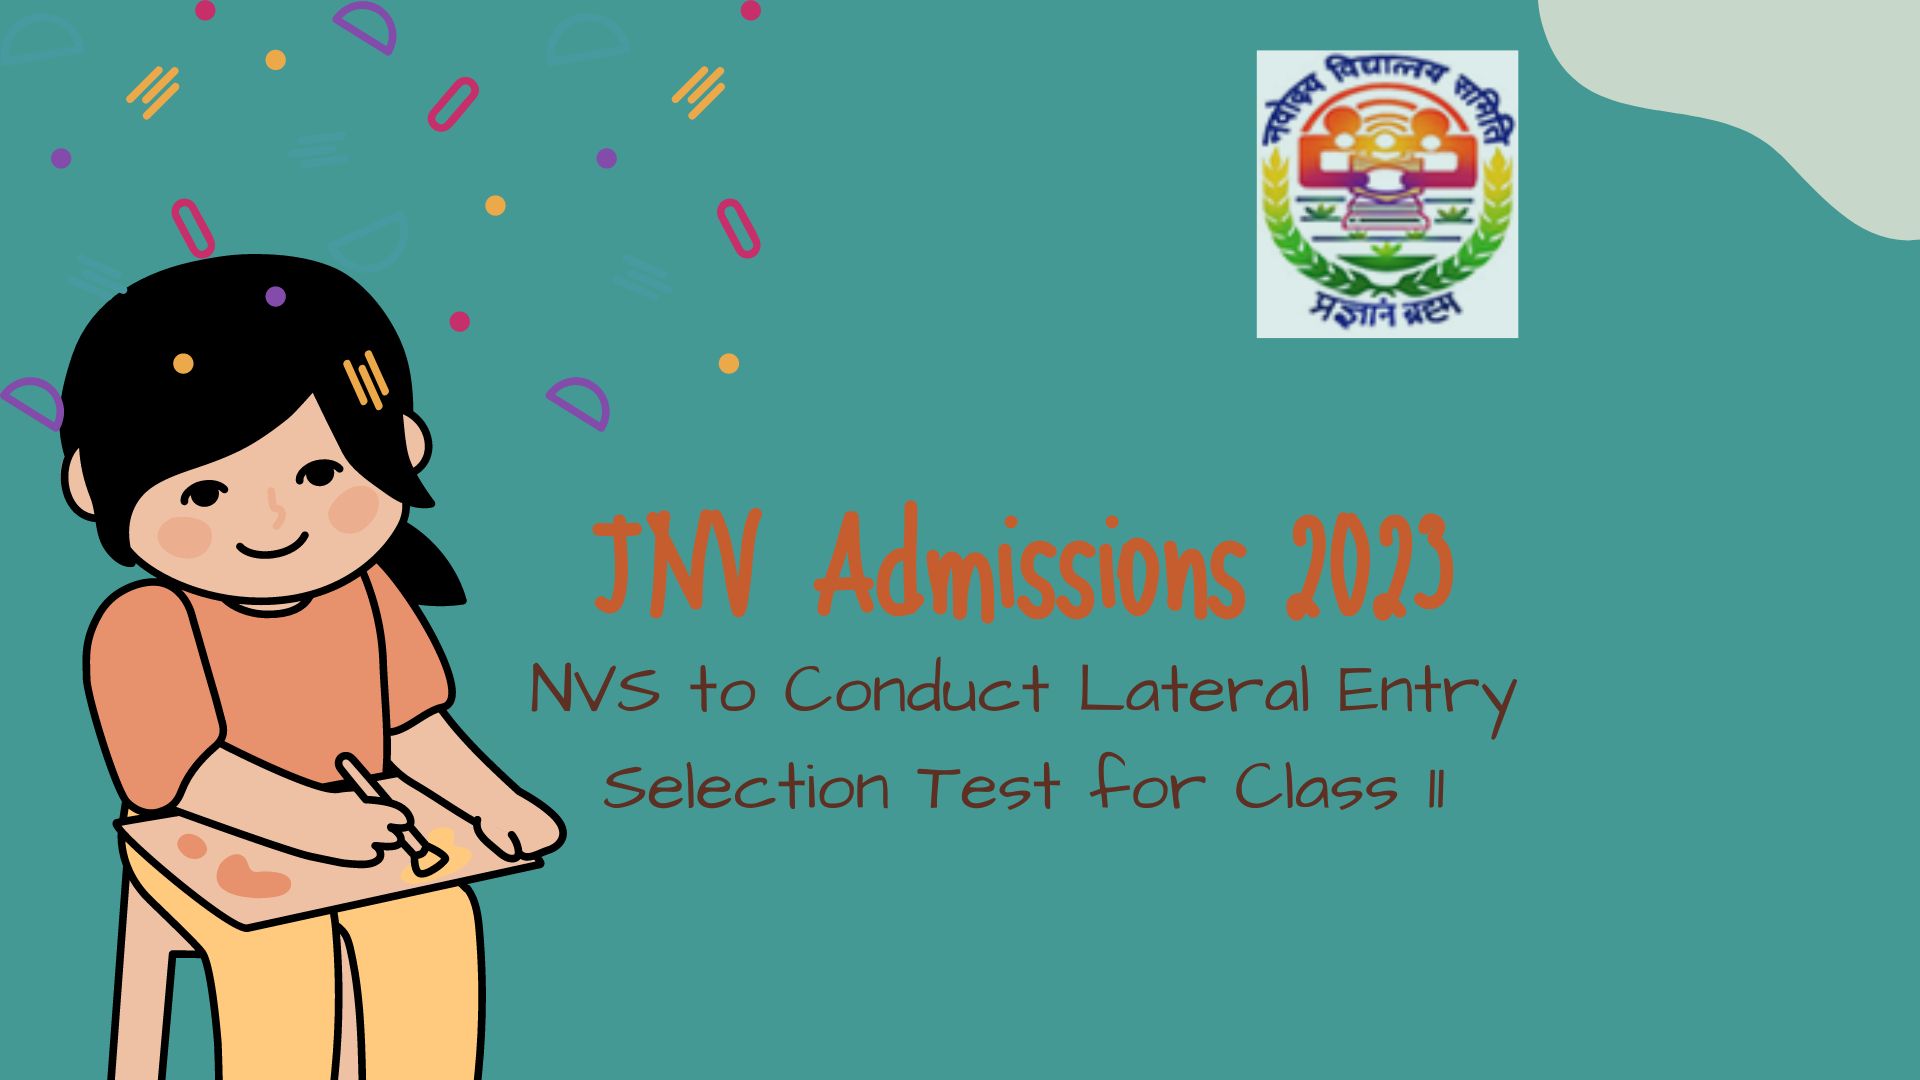 You are currently viewing JNV Admissions 2023: NVS to Conduct Lateral Entry Selection Test for Class 11